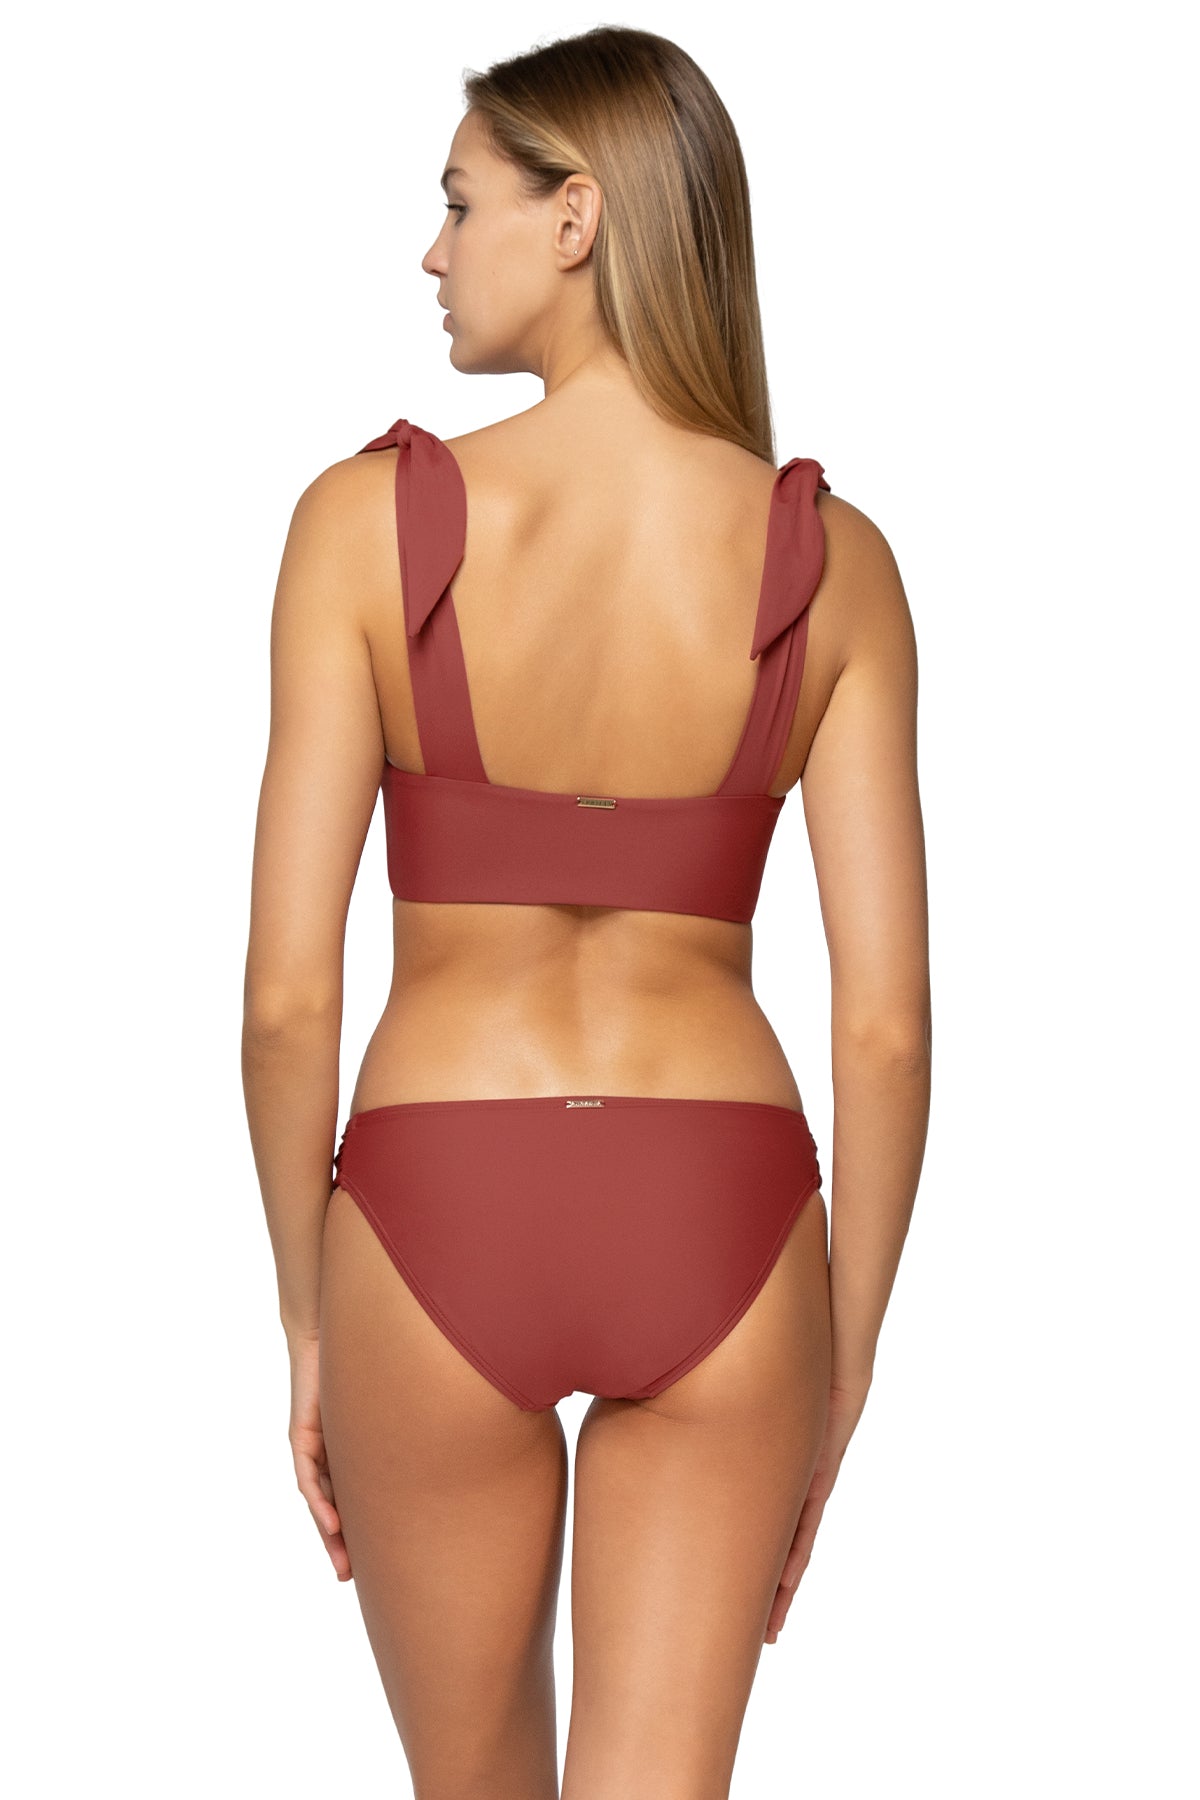 Back view of Sunsets Tuscan Red Femme Fatale Hipster Bottom